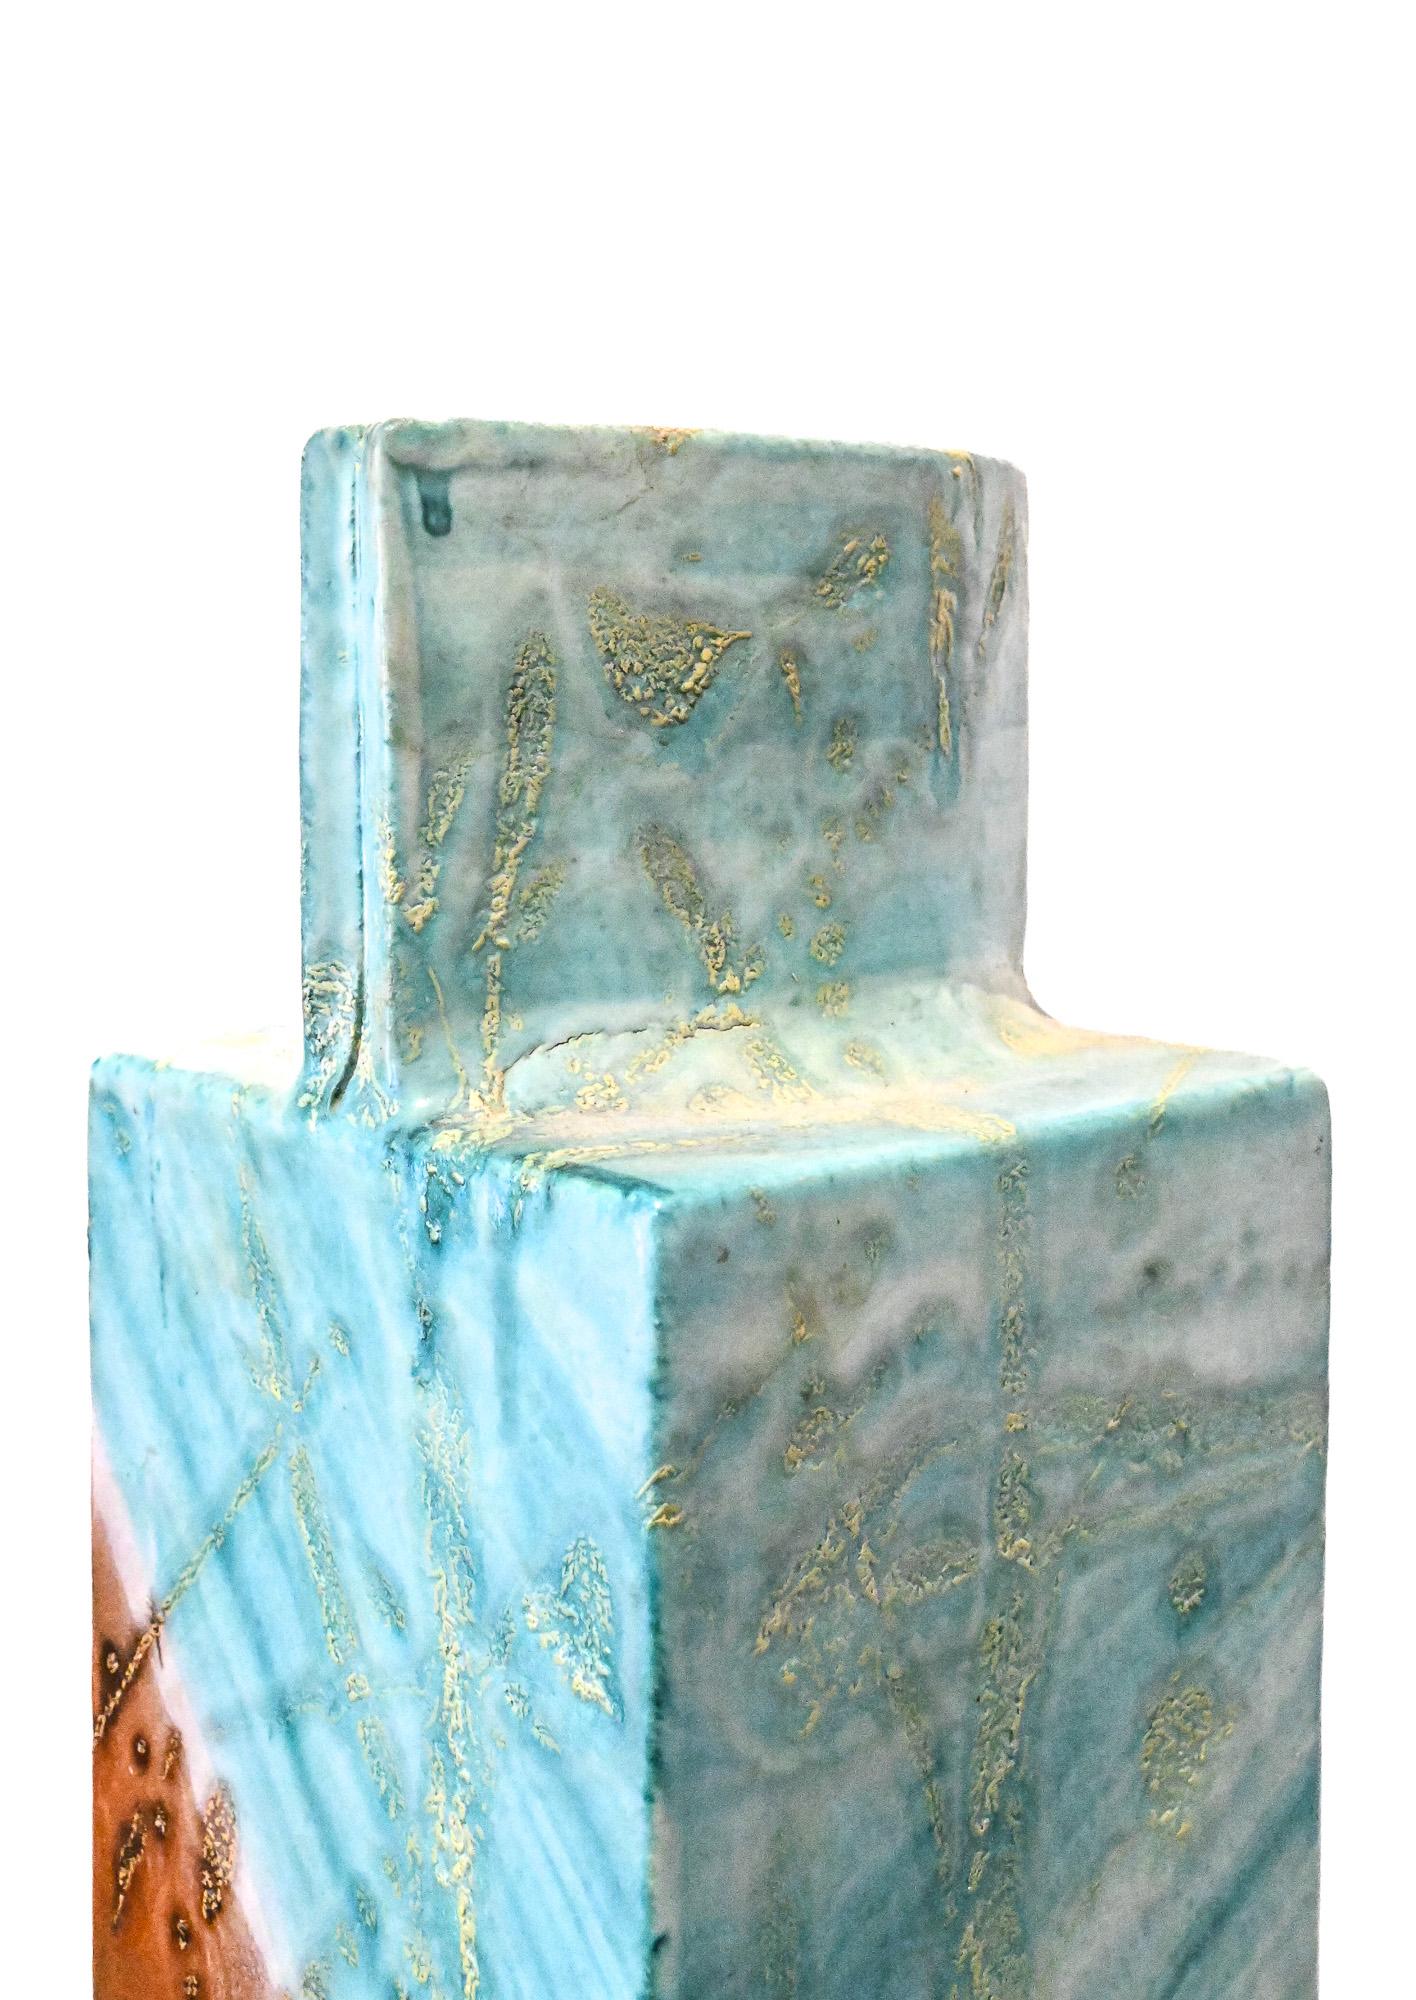 Square aqua and brown square slab vase by Marcello Fantoni Italy In Good Condition For Sale In Henley-on Thames, Oxfordshire